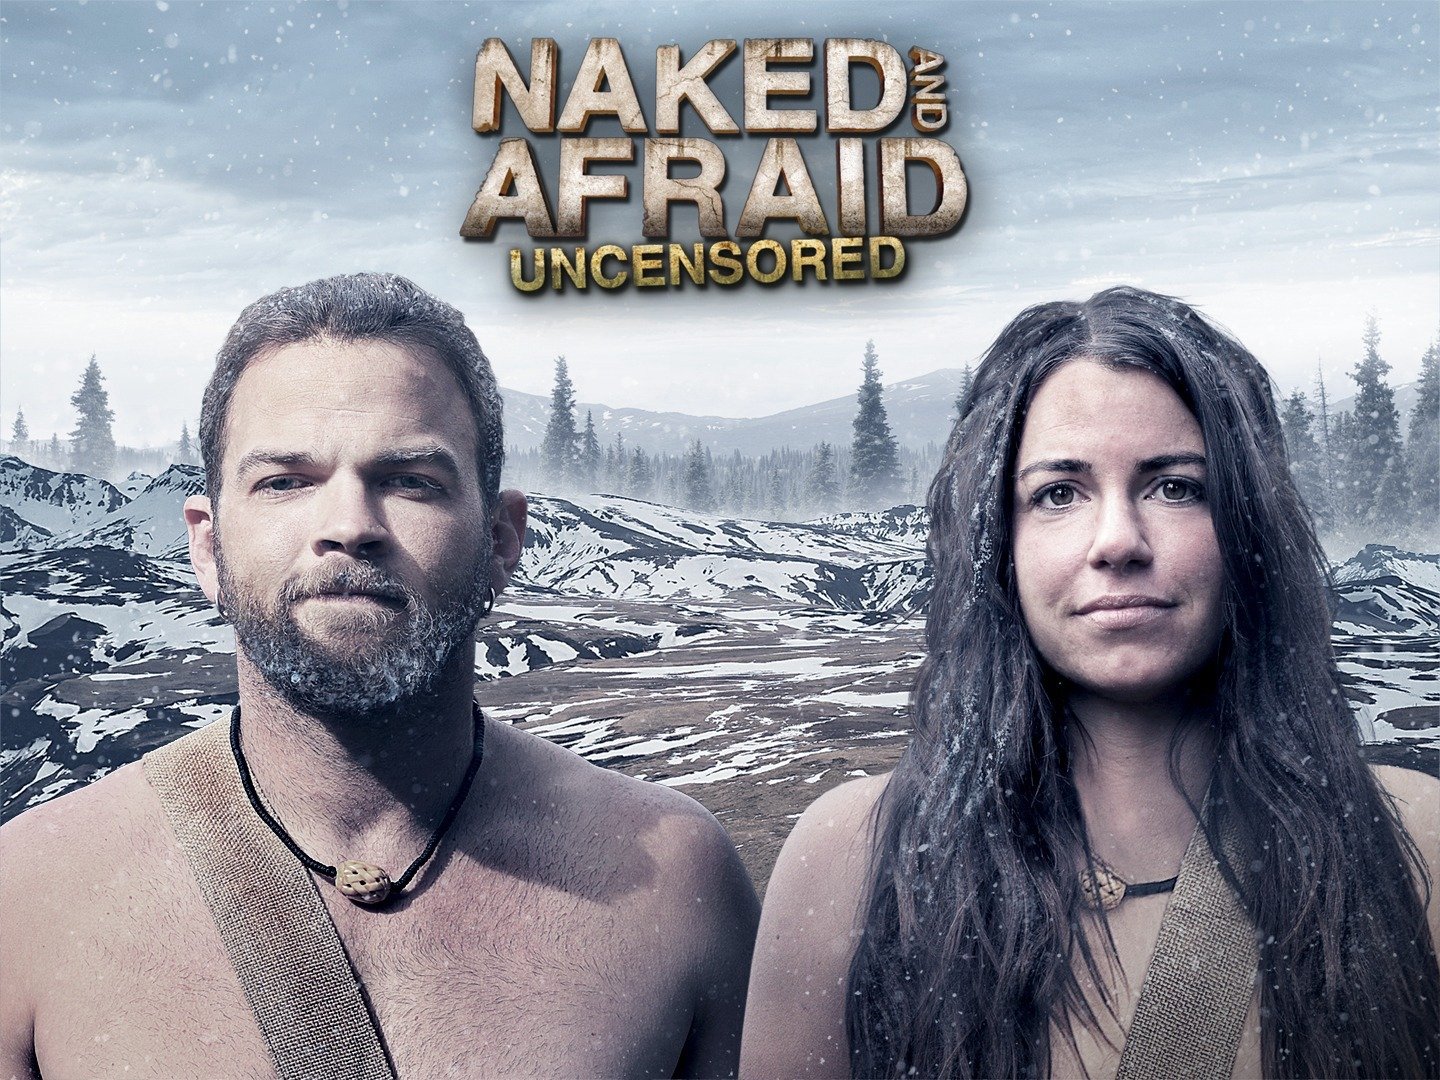 Naked and afraid uncensorded